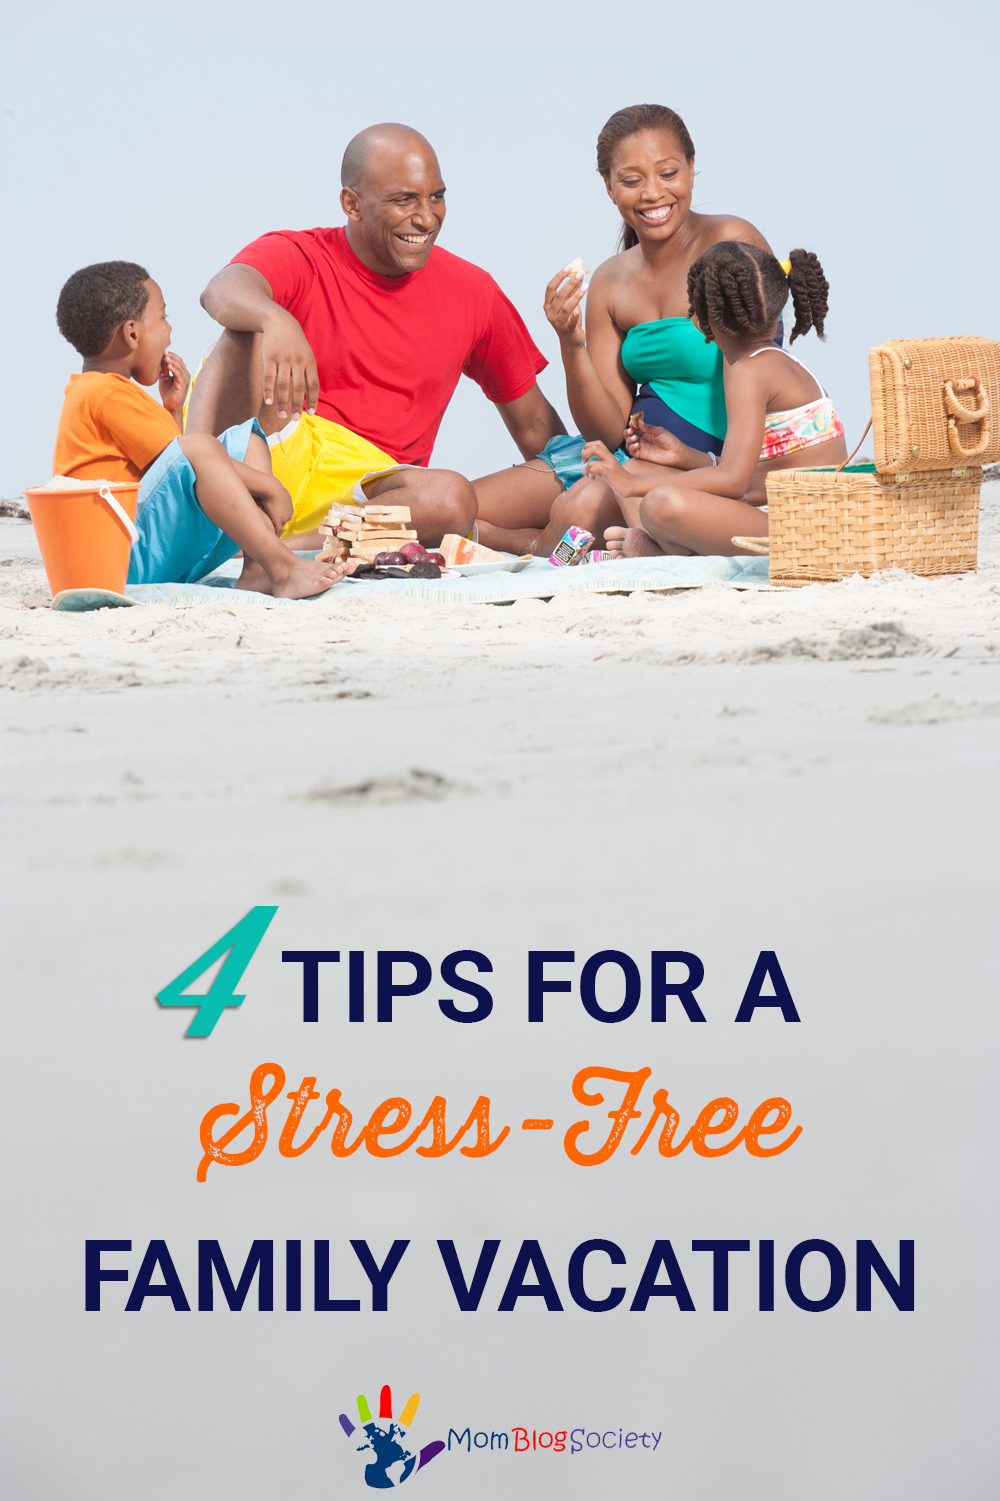 4 Tips for a Stress-Free Family Vacation